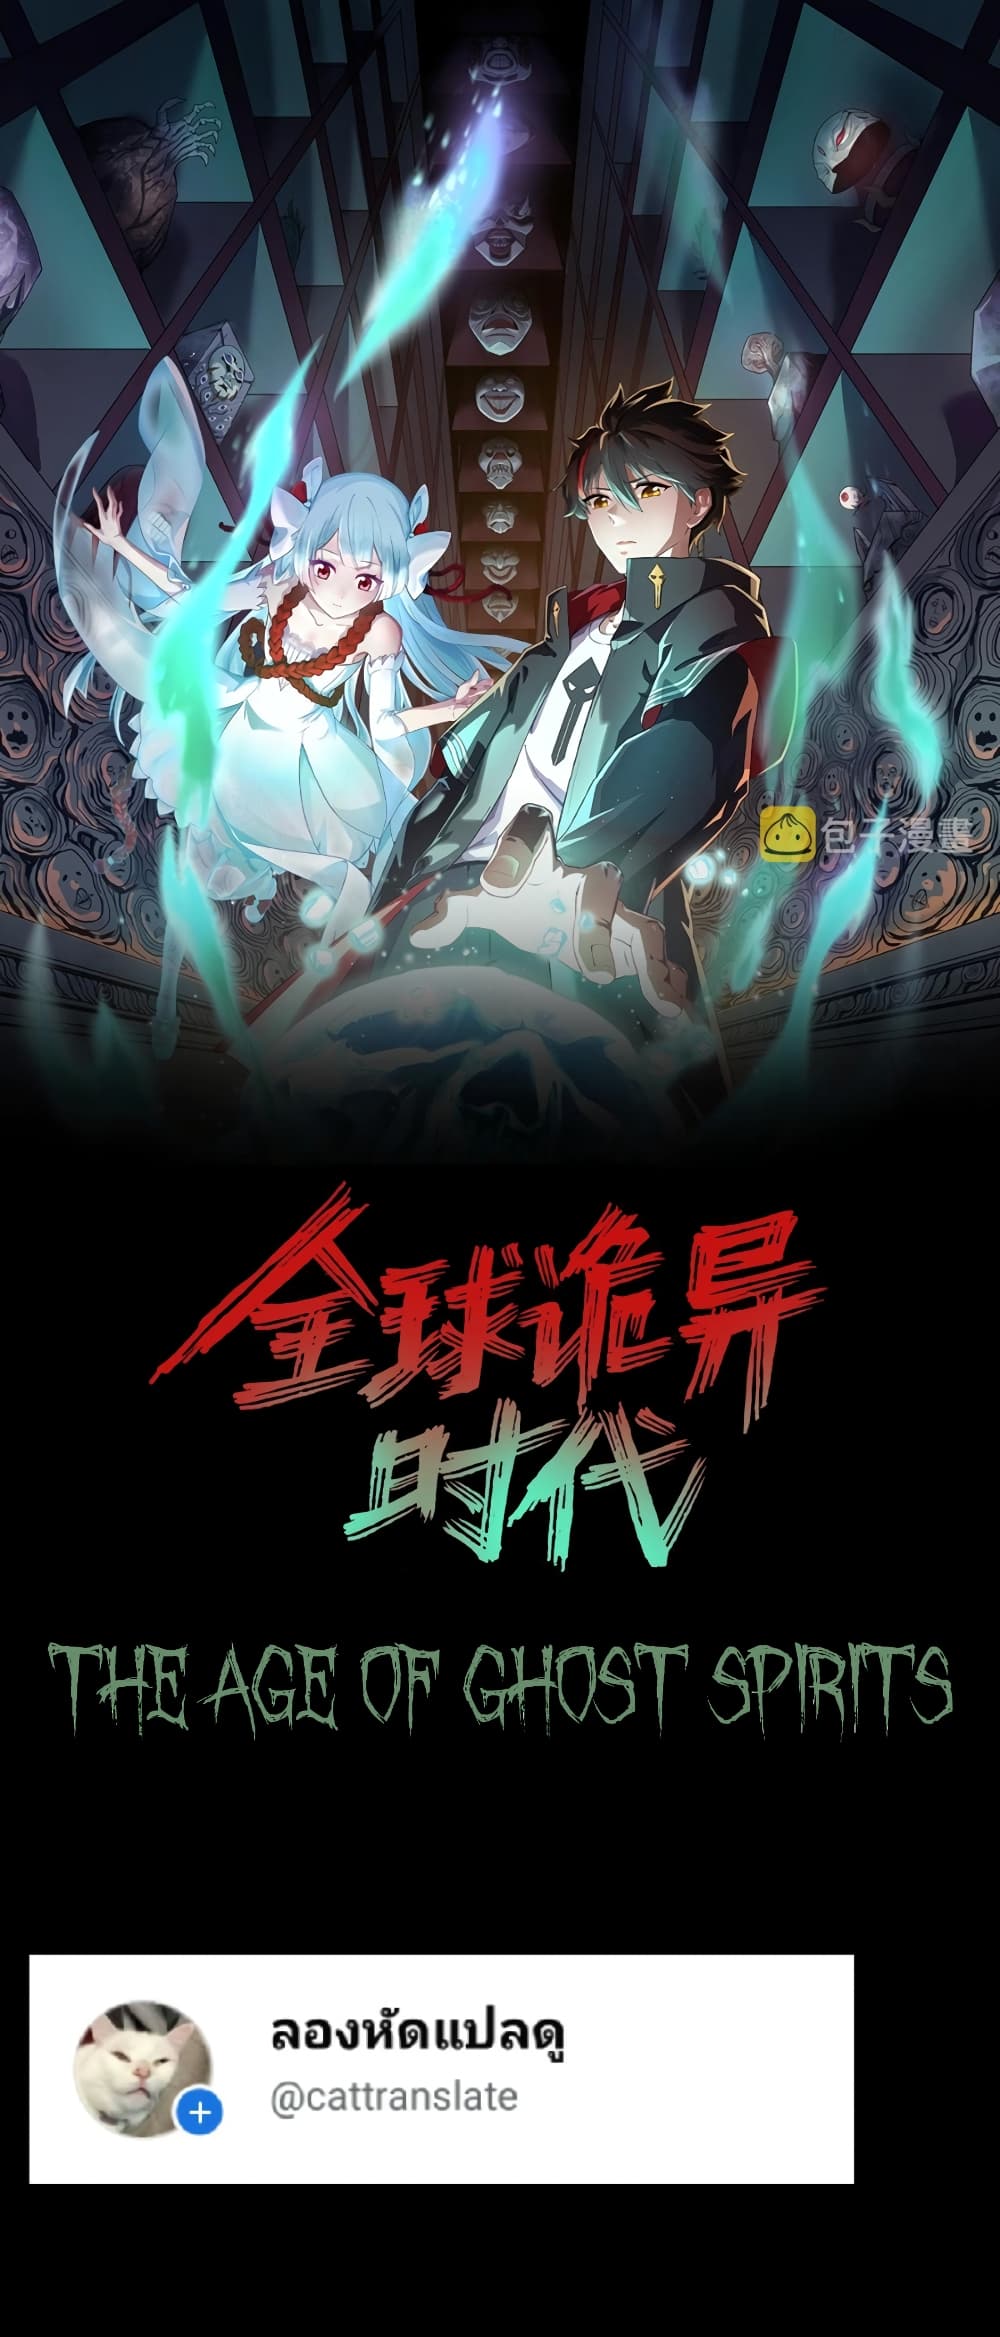 The Age of Ghost Spirits à¸à¸­à¸à¸à¸µà¹ 41 (1)